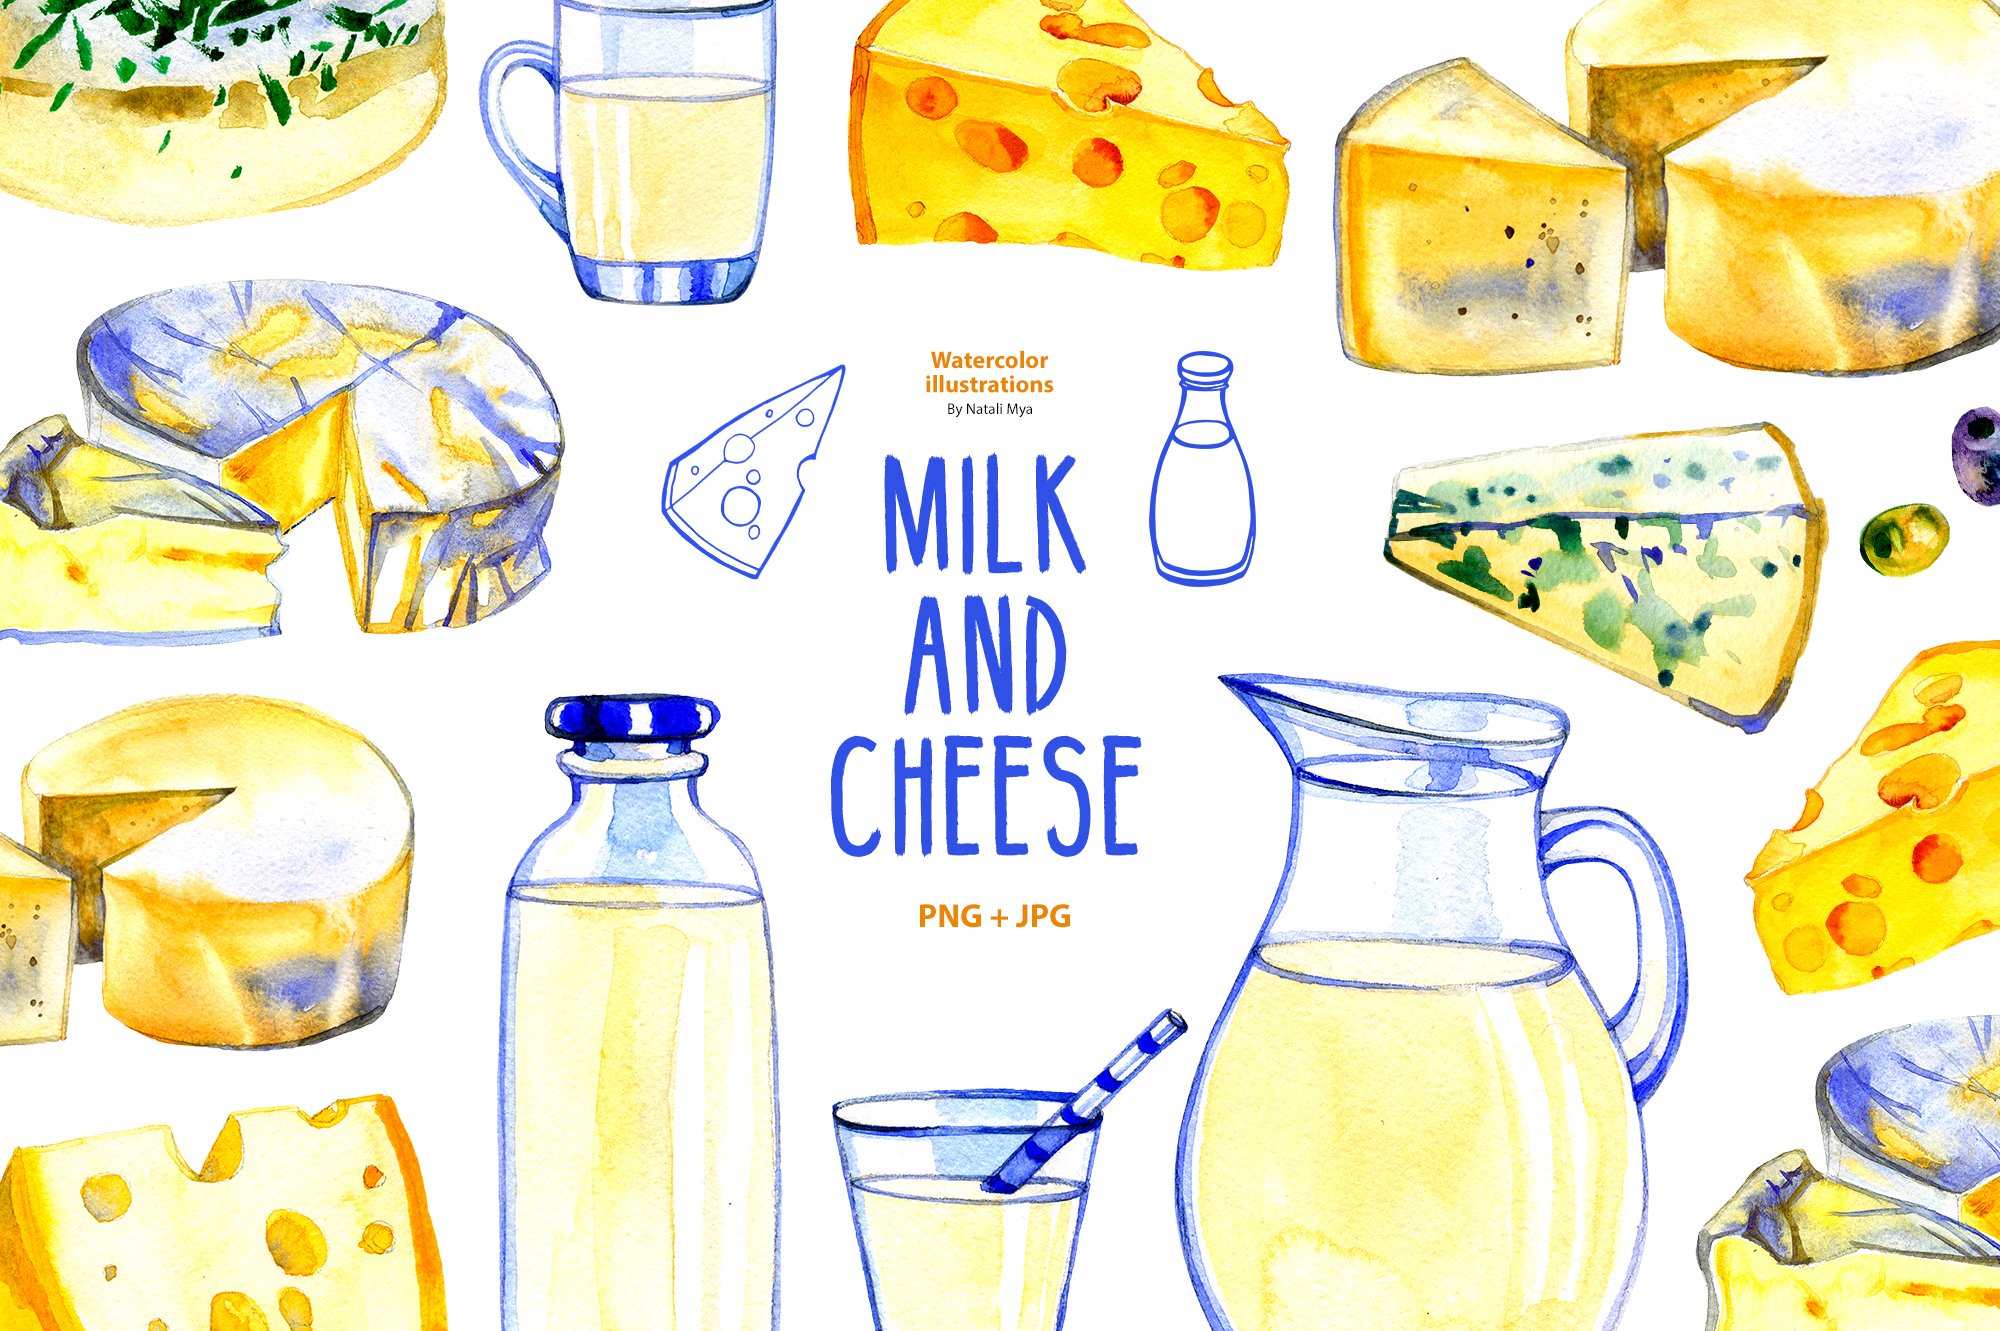 Vibrant hand-drawn watercolor illustrations of cheese and milk.